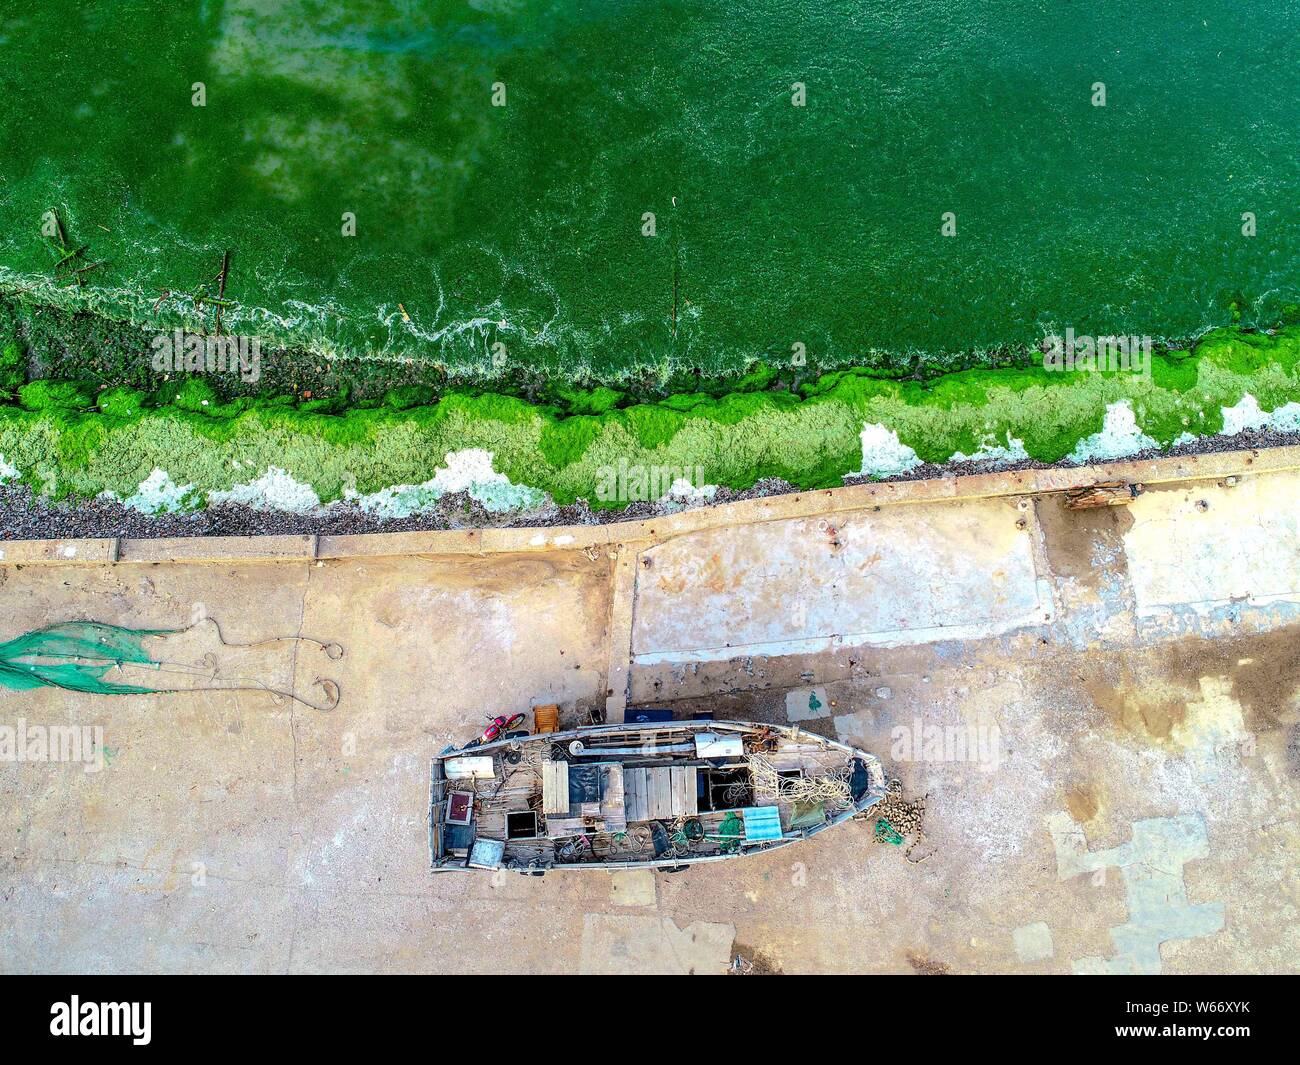 Seashore is covered by green algae, or enteromorpha prolifera, in Qingdao city, east China's Shandong province, 3 July 2018.   A substantial amount of Stock Photo